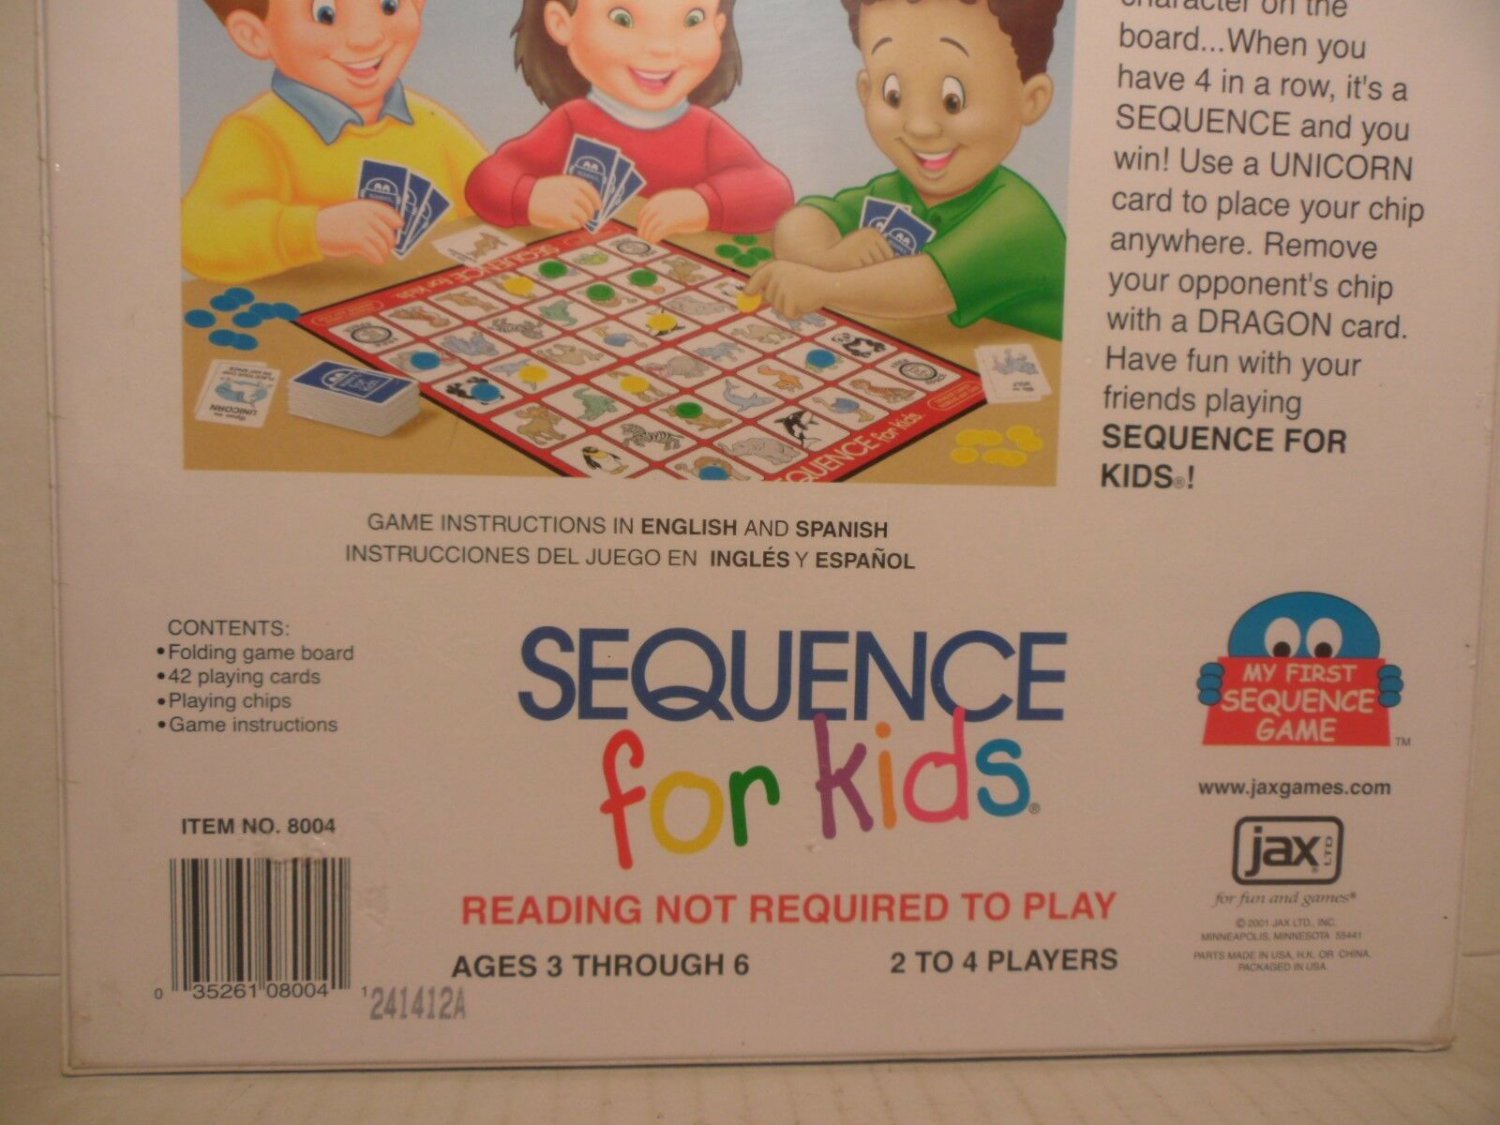 sequence game rules 4 players